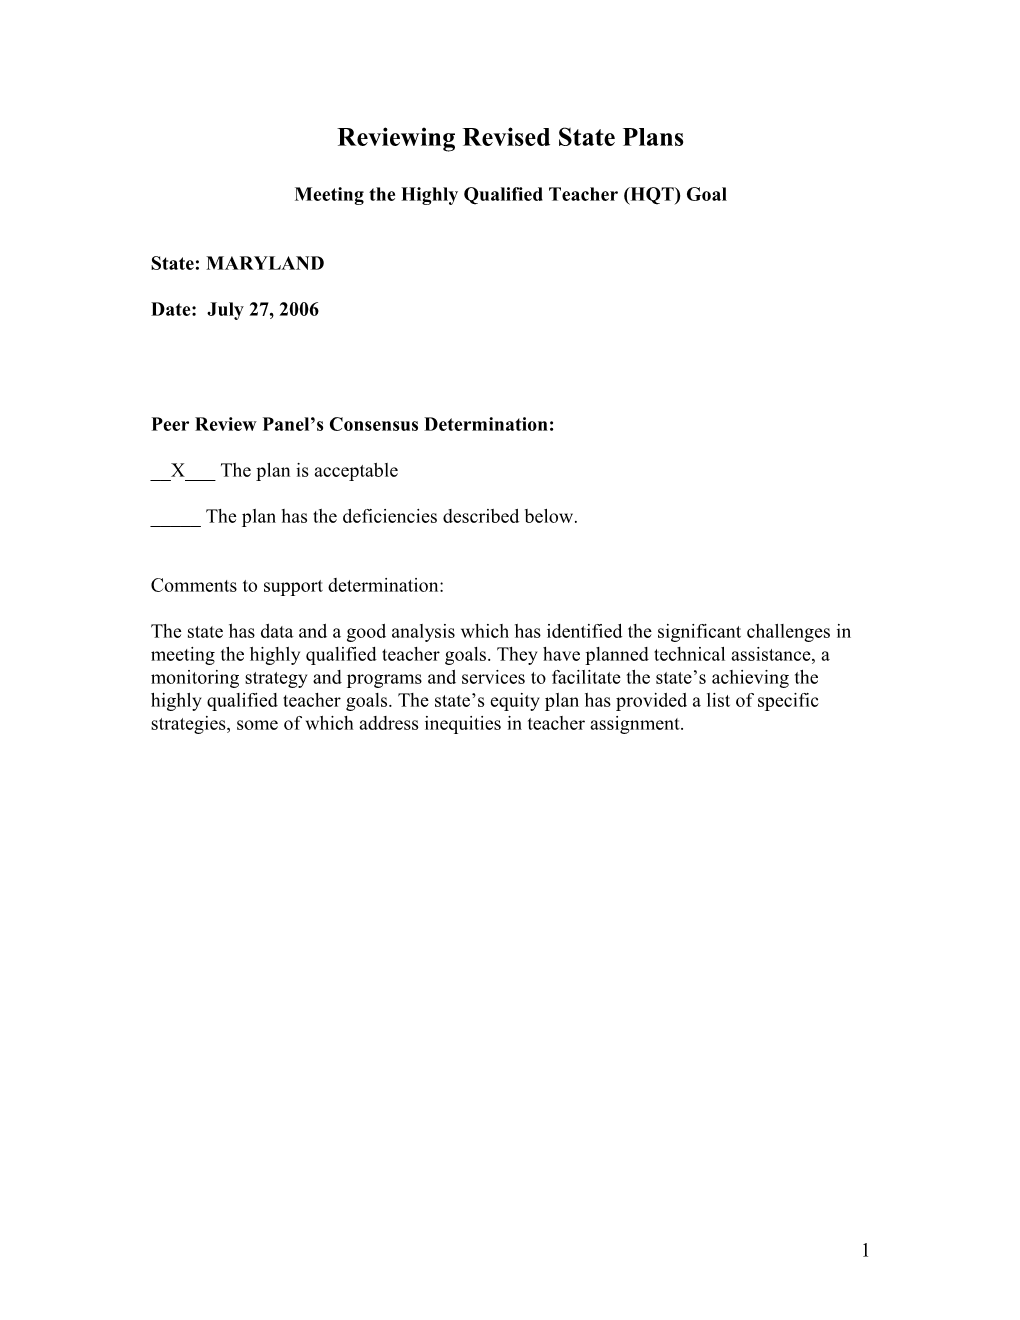 Maryland Highly Qualified Teacher State Plans Reviewer Comments (MS WORD)